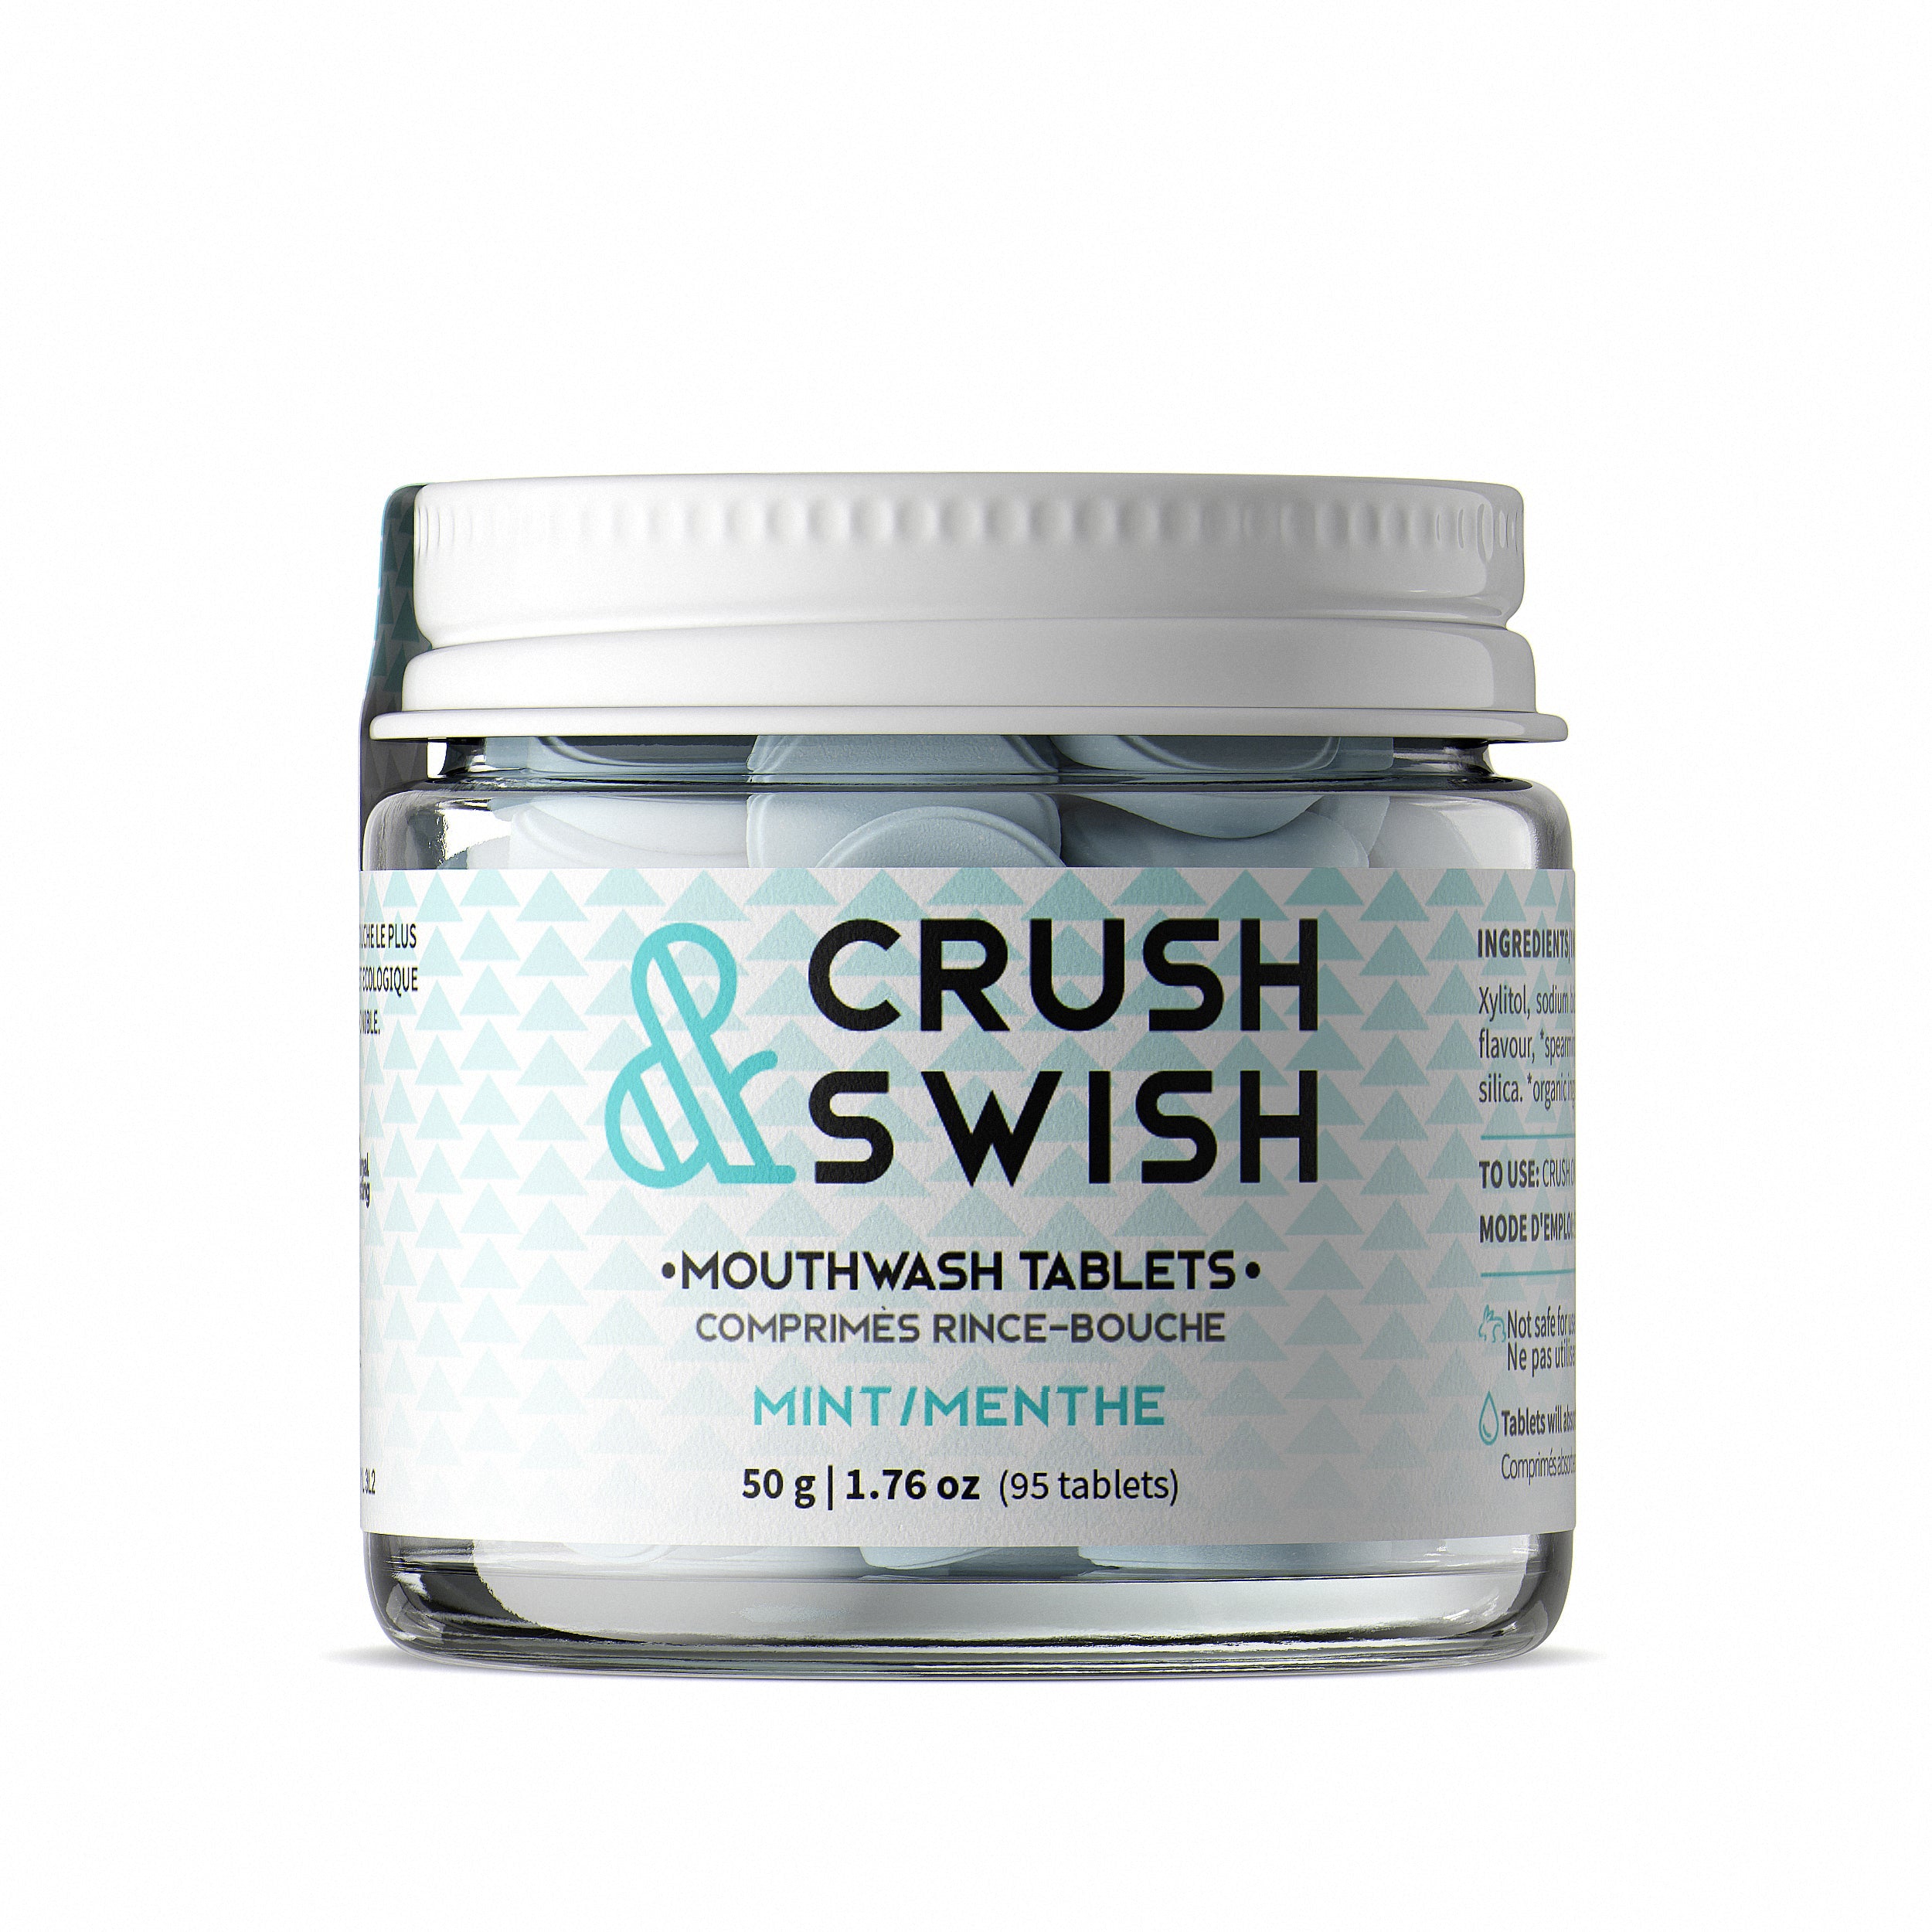 Crush & Swish MINT 50g - Mouthwash Tablets - WHOLESALE Mouthwash Tablet - nelsonnaturals remineralizing toothpaste